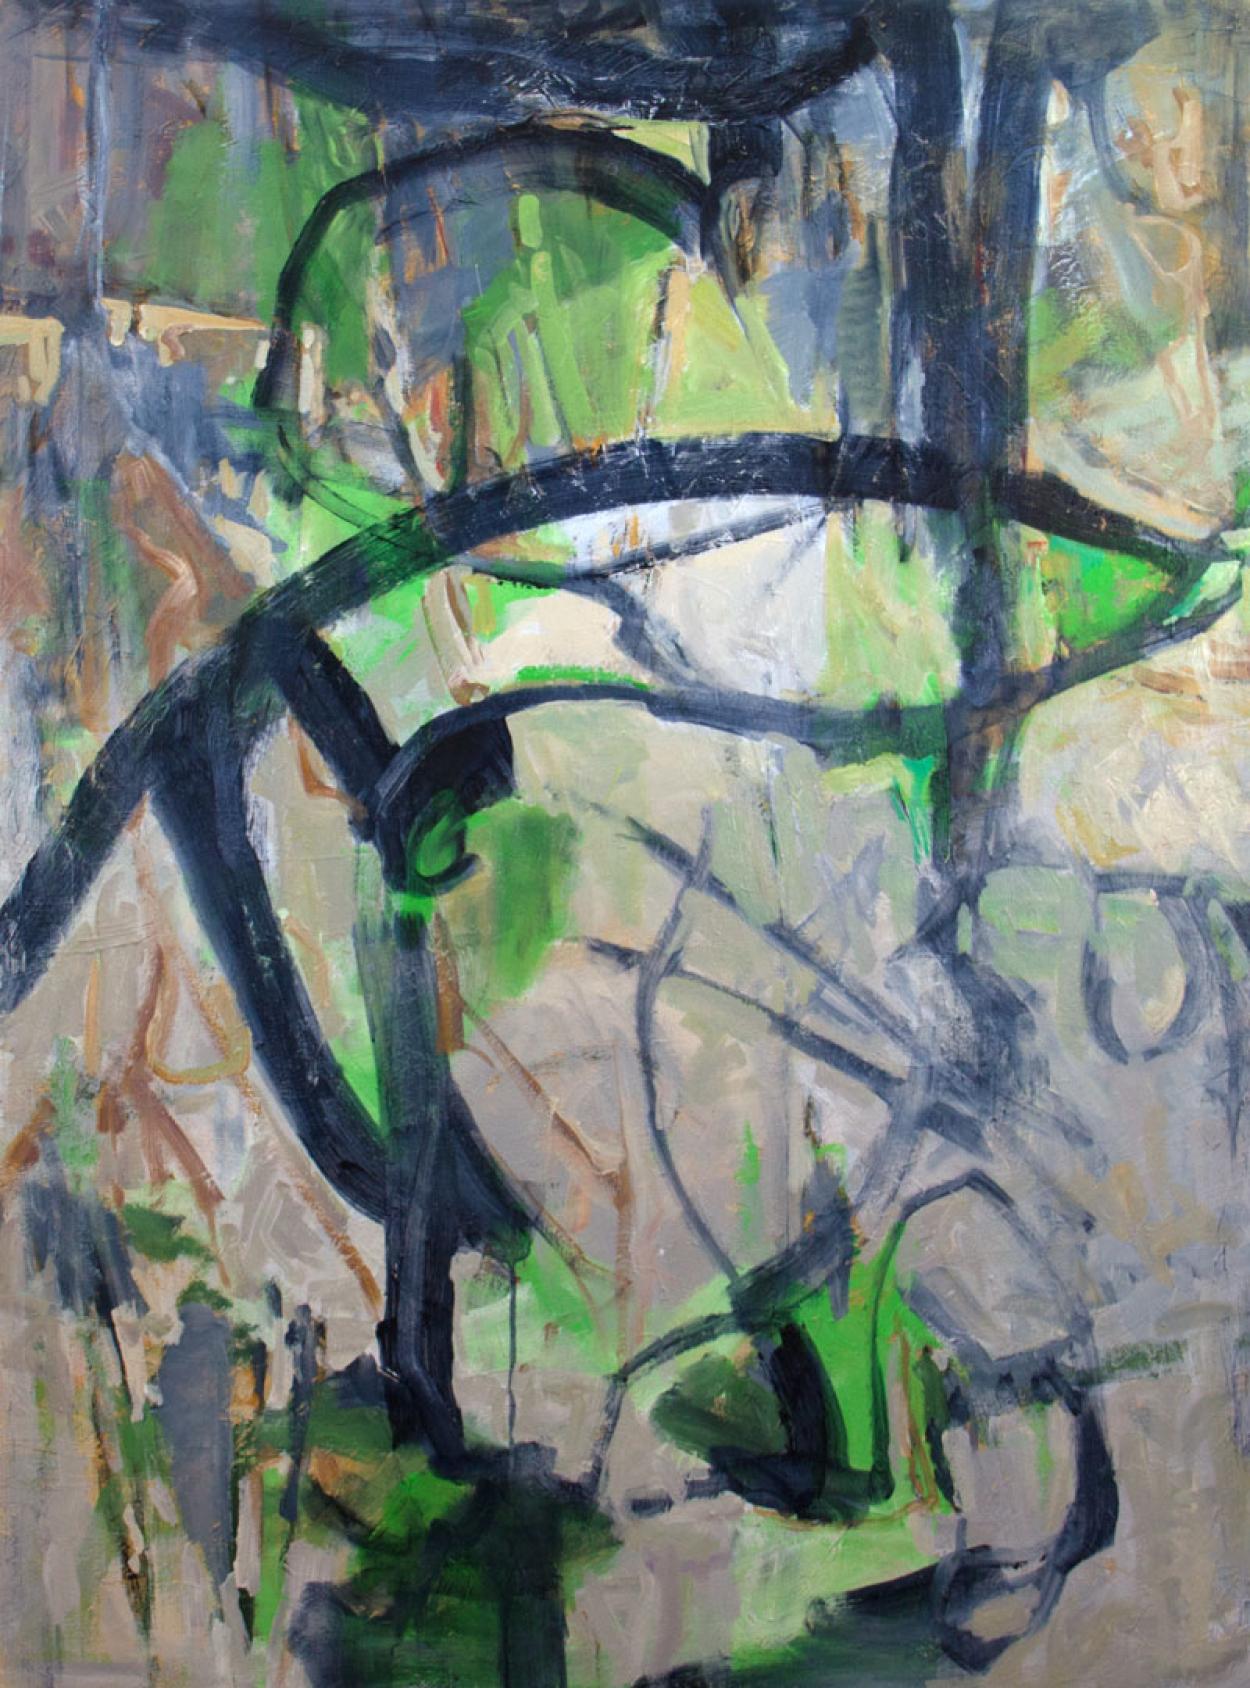  Thicket, , Acrylic, Texas Artist. Contemporary Art, Abstract Art - Painting by Cheryl McClure